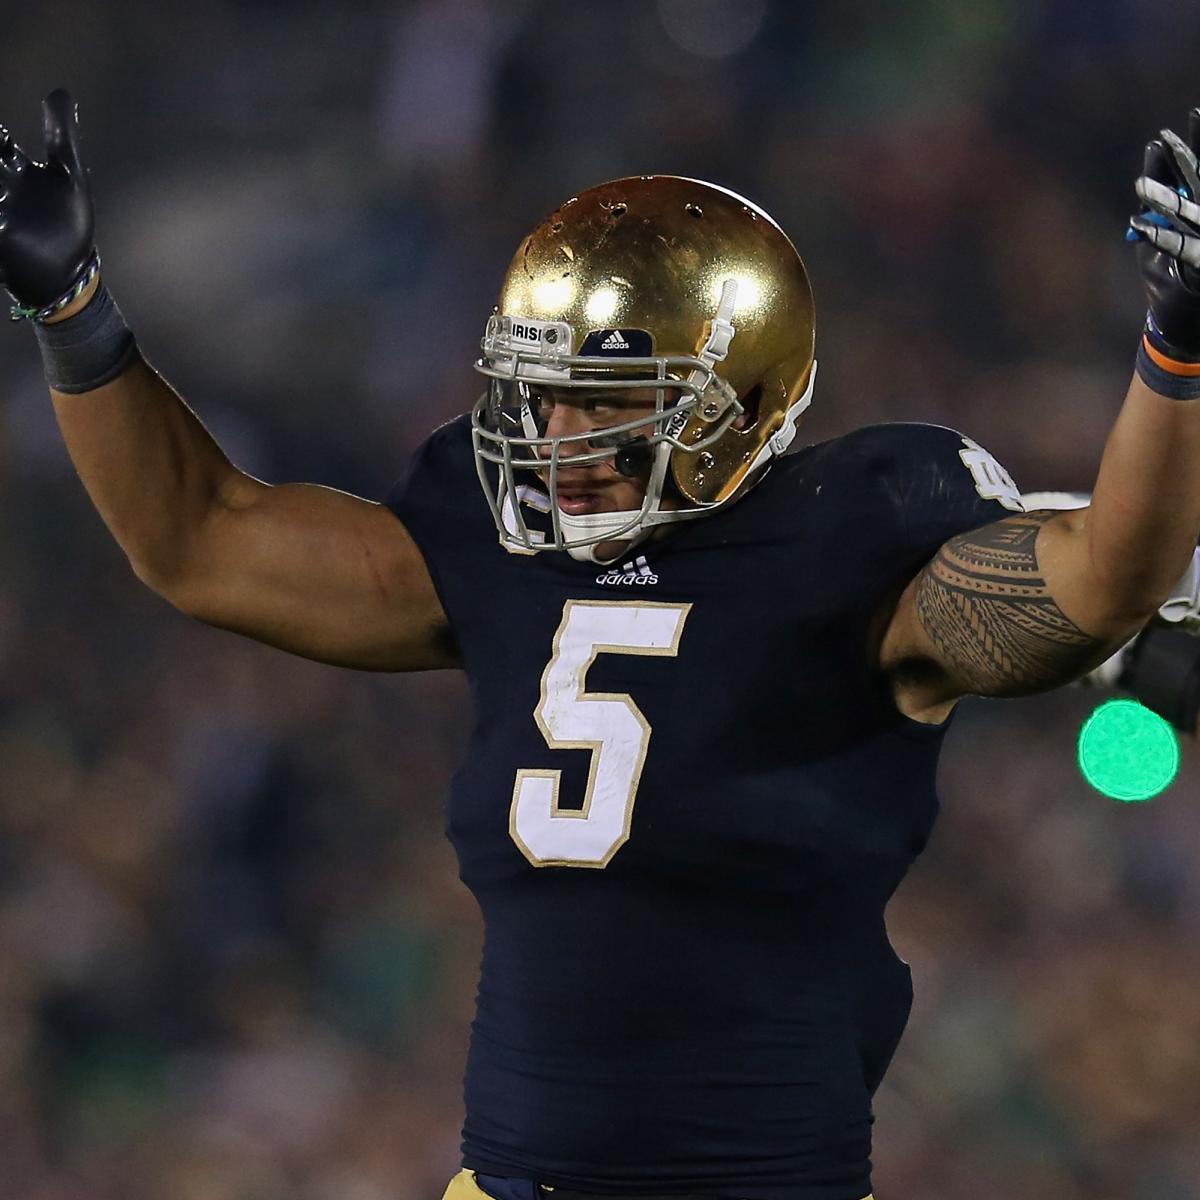 Notre Dame Football: How 2014 Roster Compares to Undefeated 2012 Team